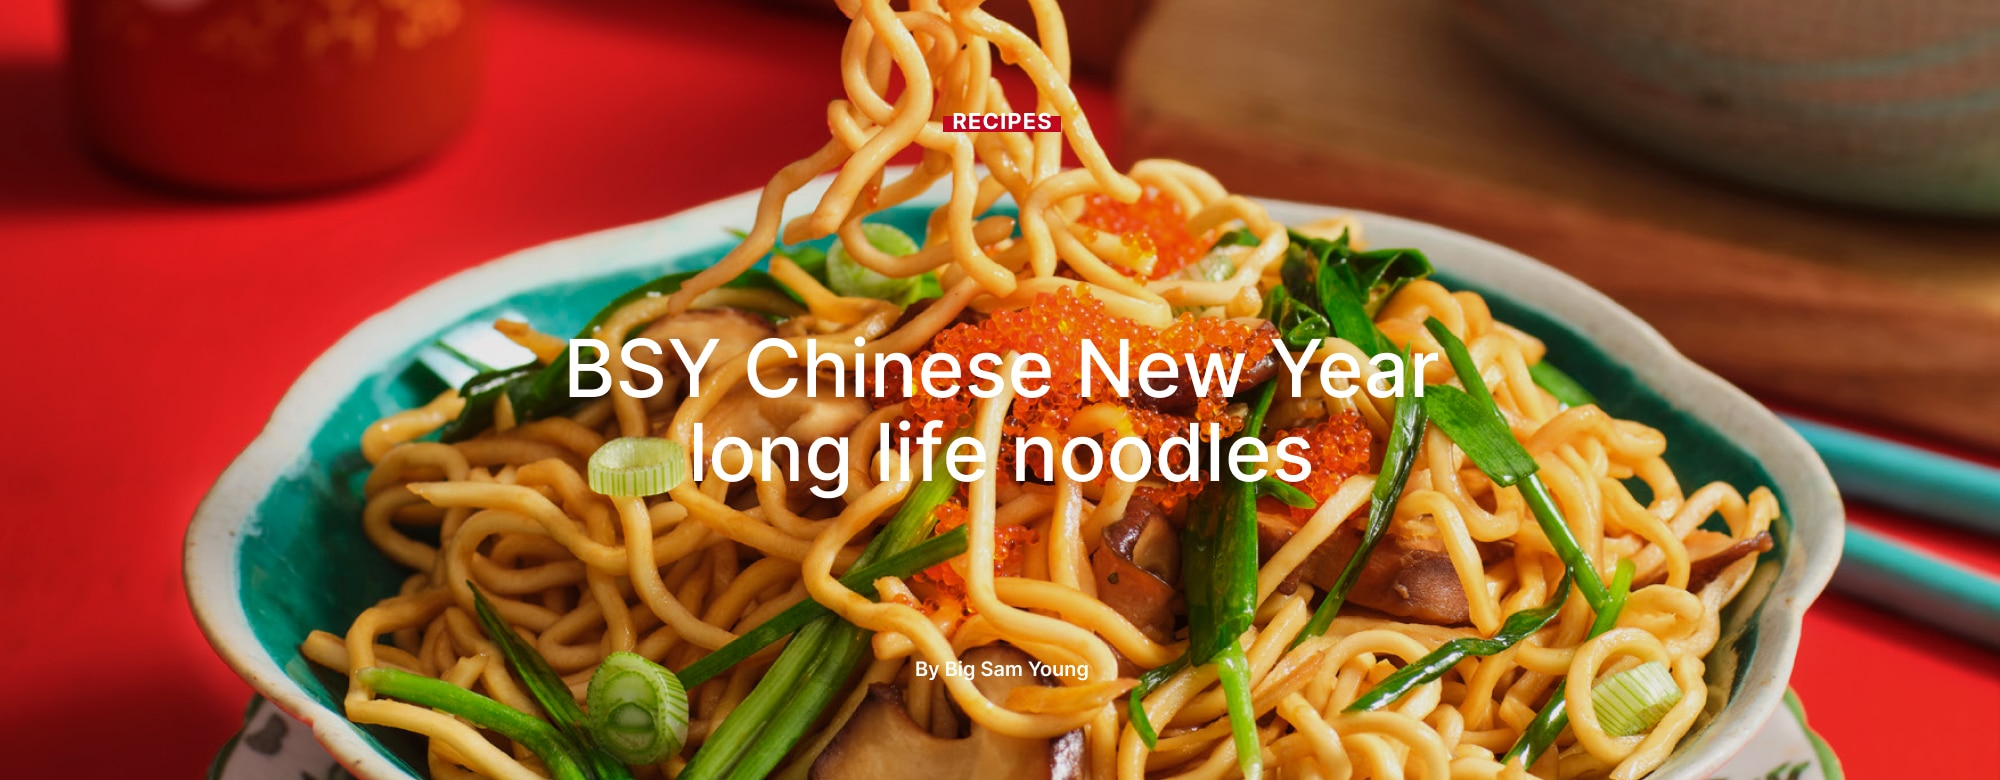 BSY Chinese New Year long life noodles